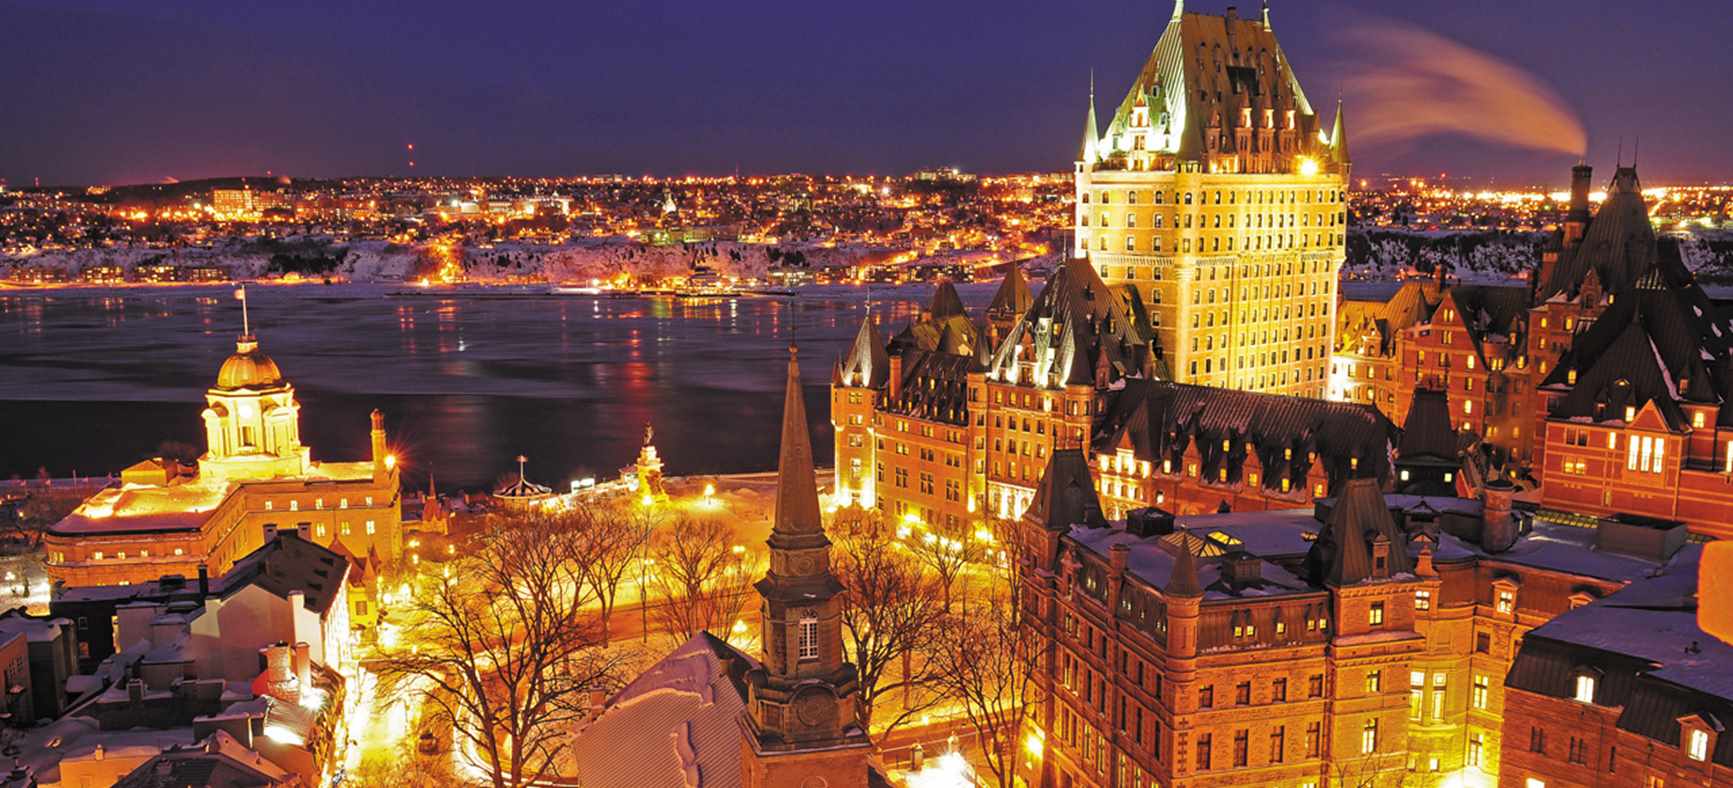 Amazing Quebec Pictures & Backgrounds